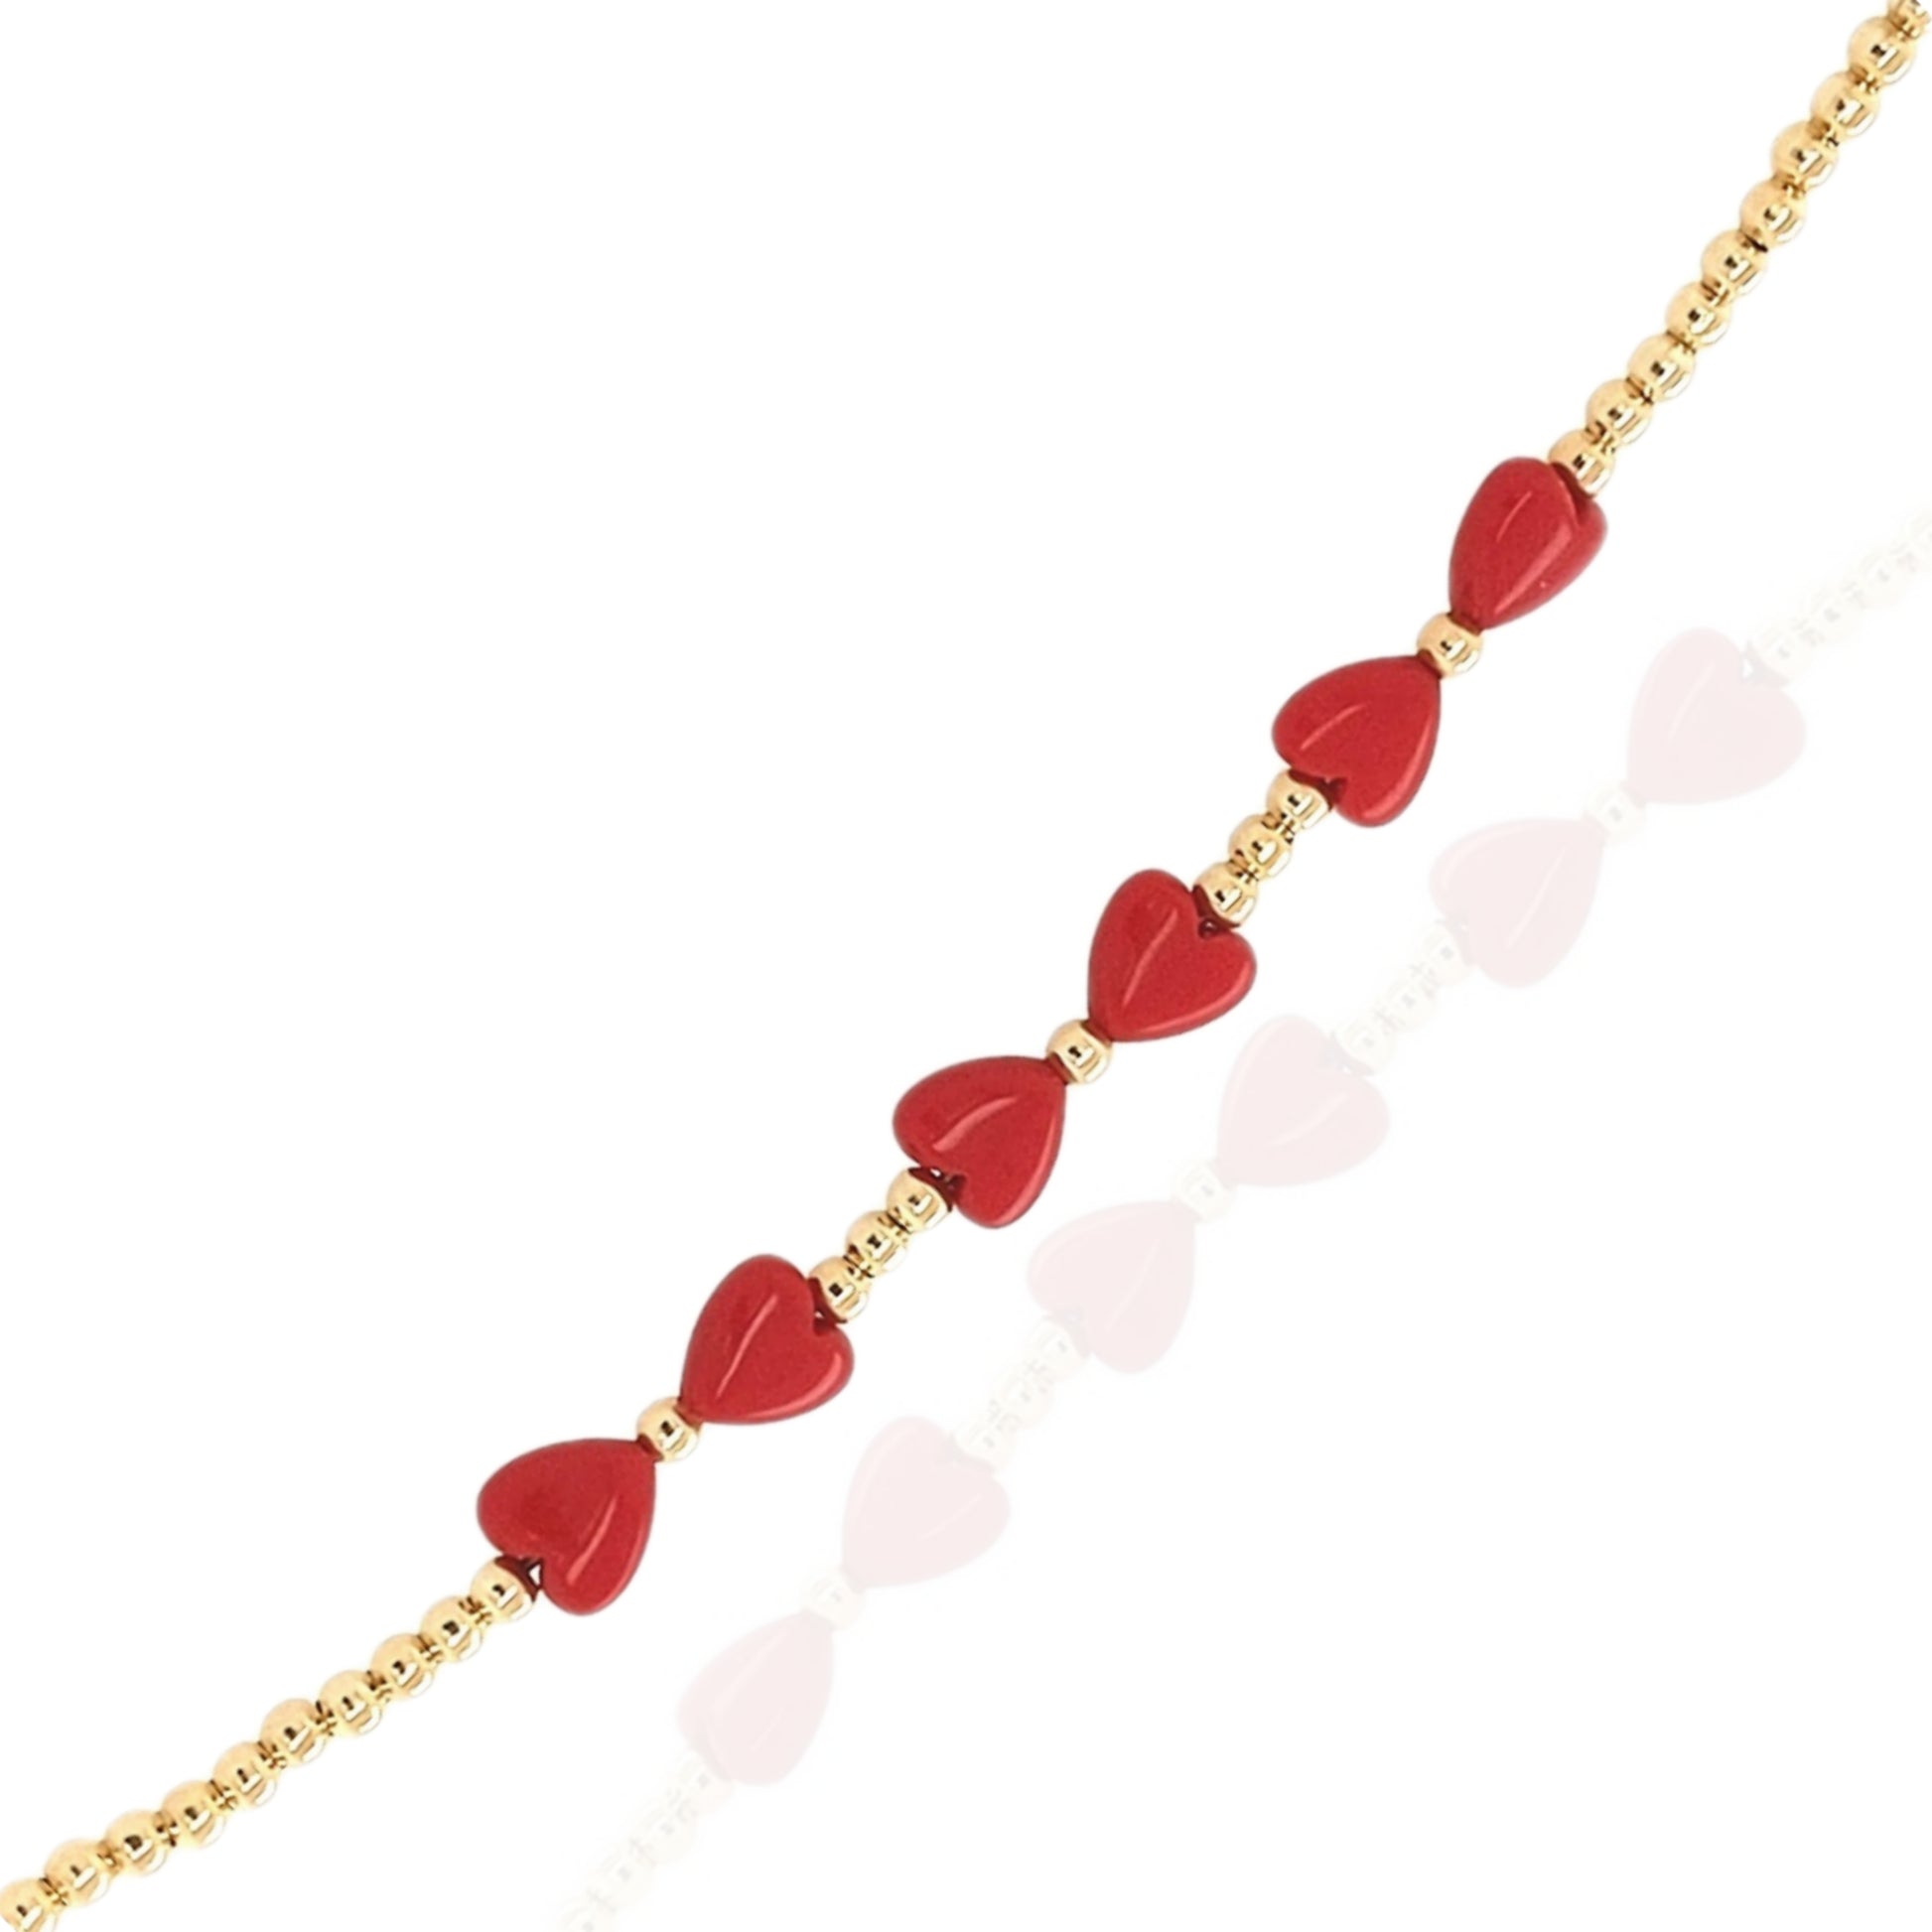 Small Gold Beads With 6 Red Hearts in the Center Children's Bracelet - HK Jewels